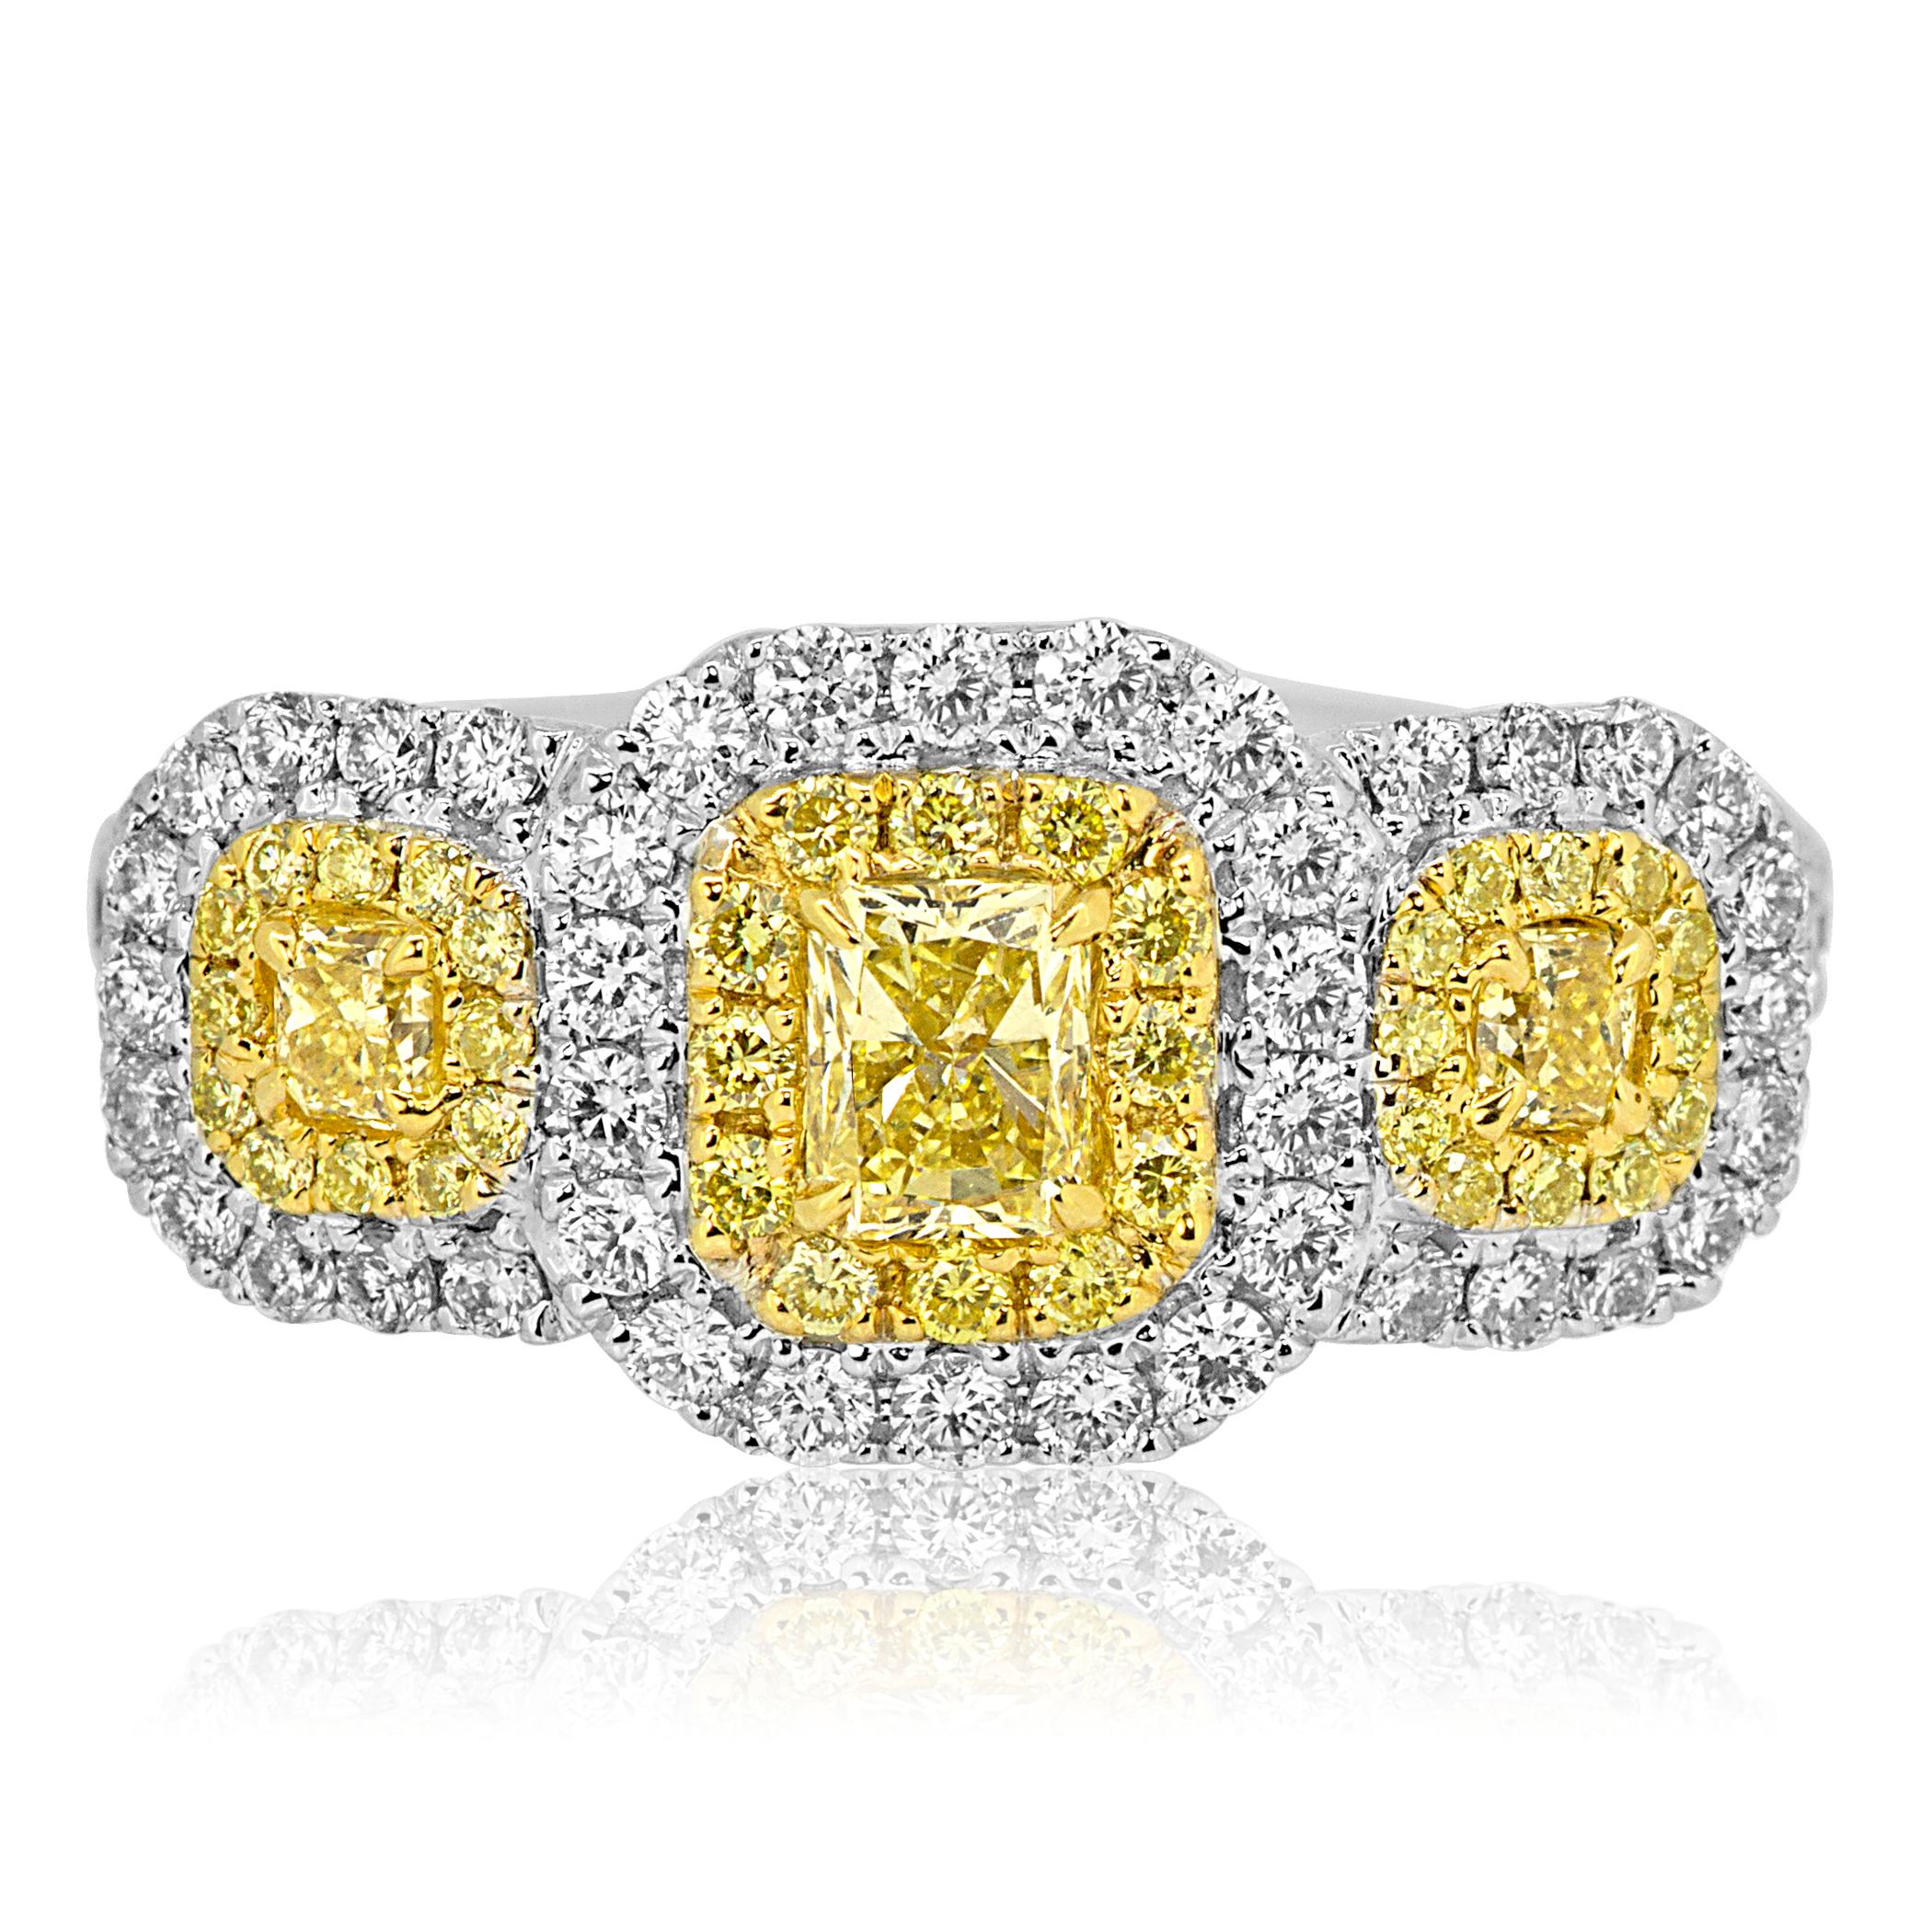 Stunning Natural Fancy Yellow Diamond Radiant Cut 0.36 Carat Flanked With 2 Natural Fancy Yellow Diamond 0.17 Carat on the sides encircled in a double Halo  Natural Fancy Yellow Diamond Round 0.21 Carat and White Diamond Rounds 0.63 Carat in 18K